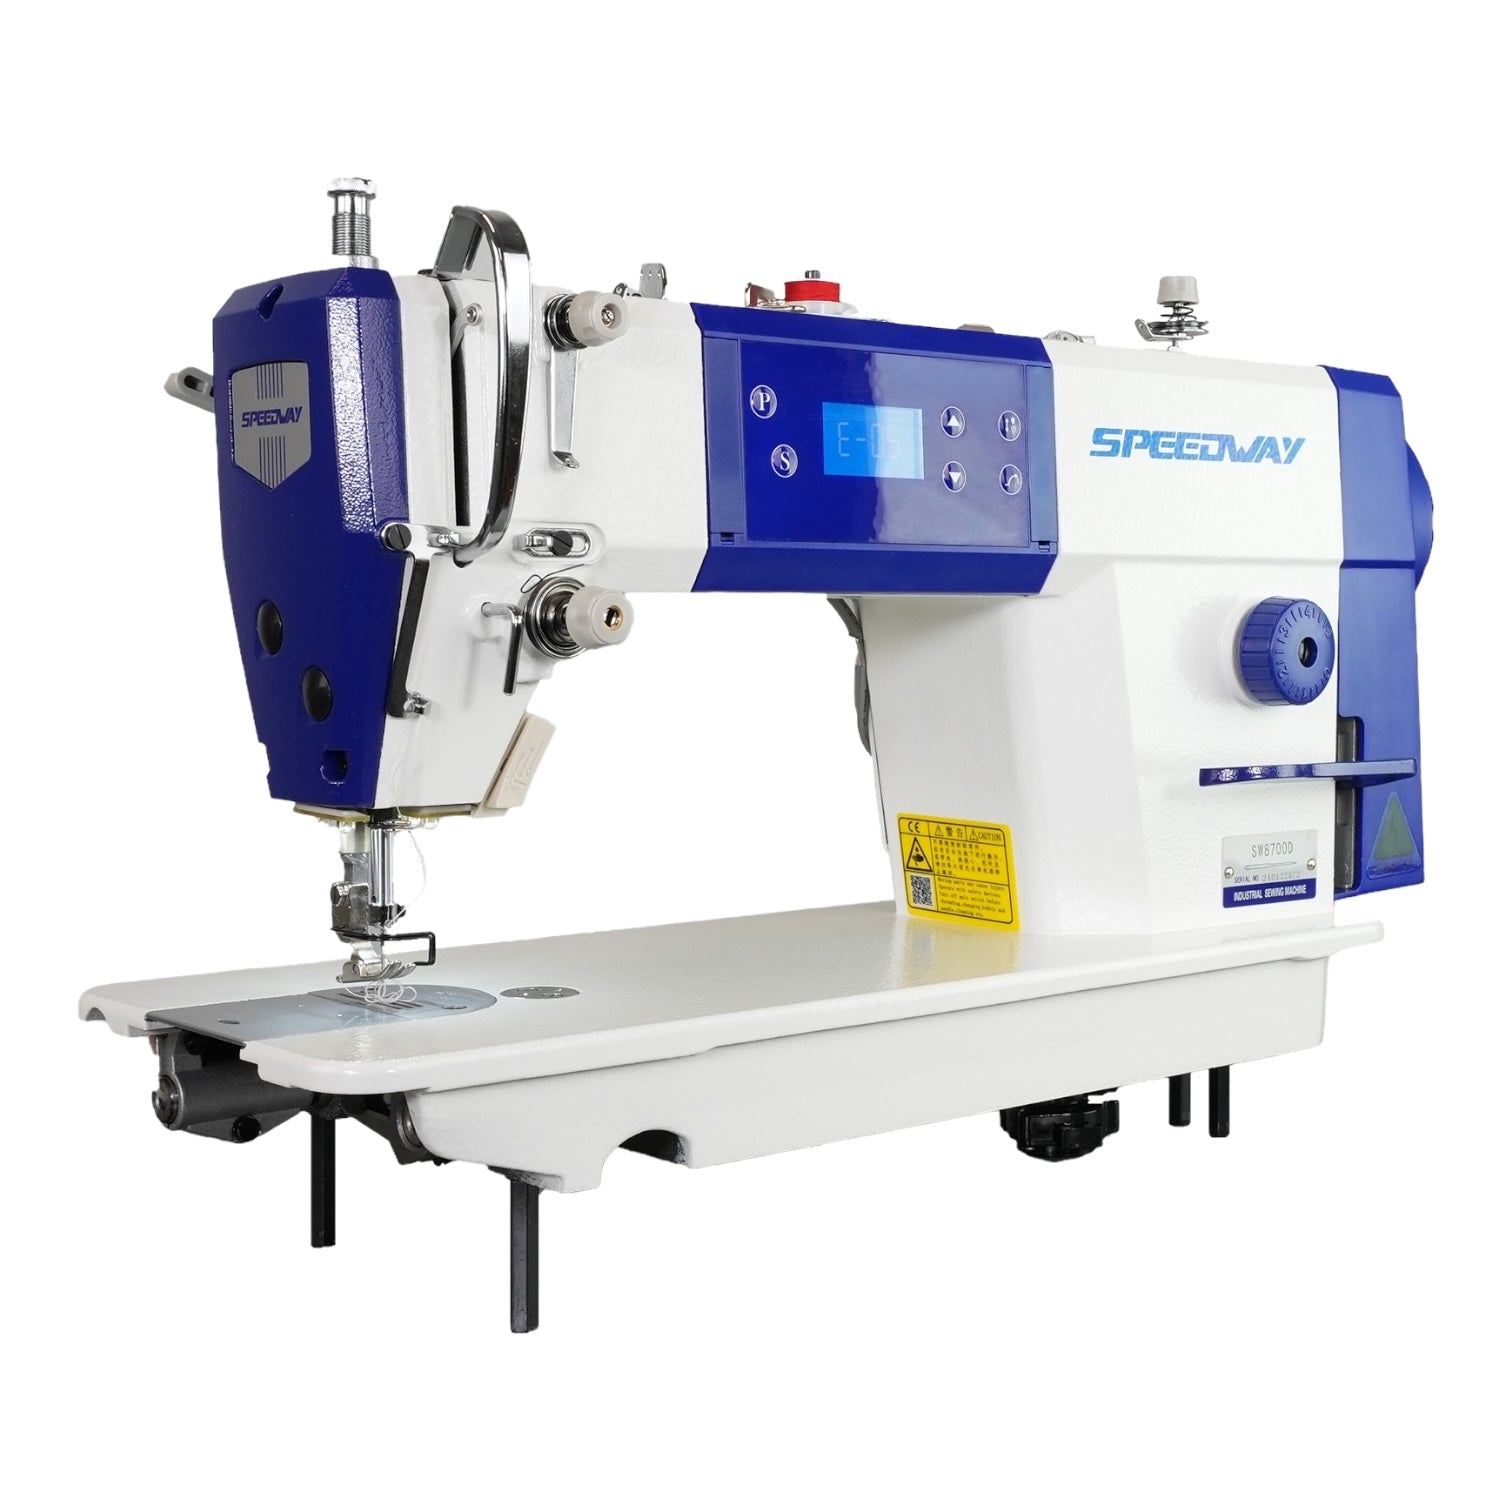 SPEEDWAY SW 8700 D Single Needle Lockstitch Industrial Sewing Machine with Servo Motor, Table and Stand Included